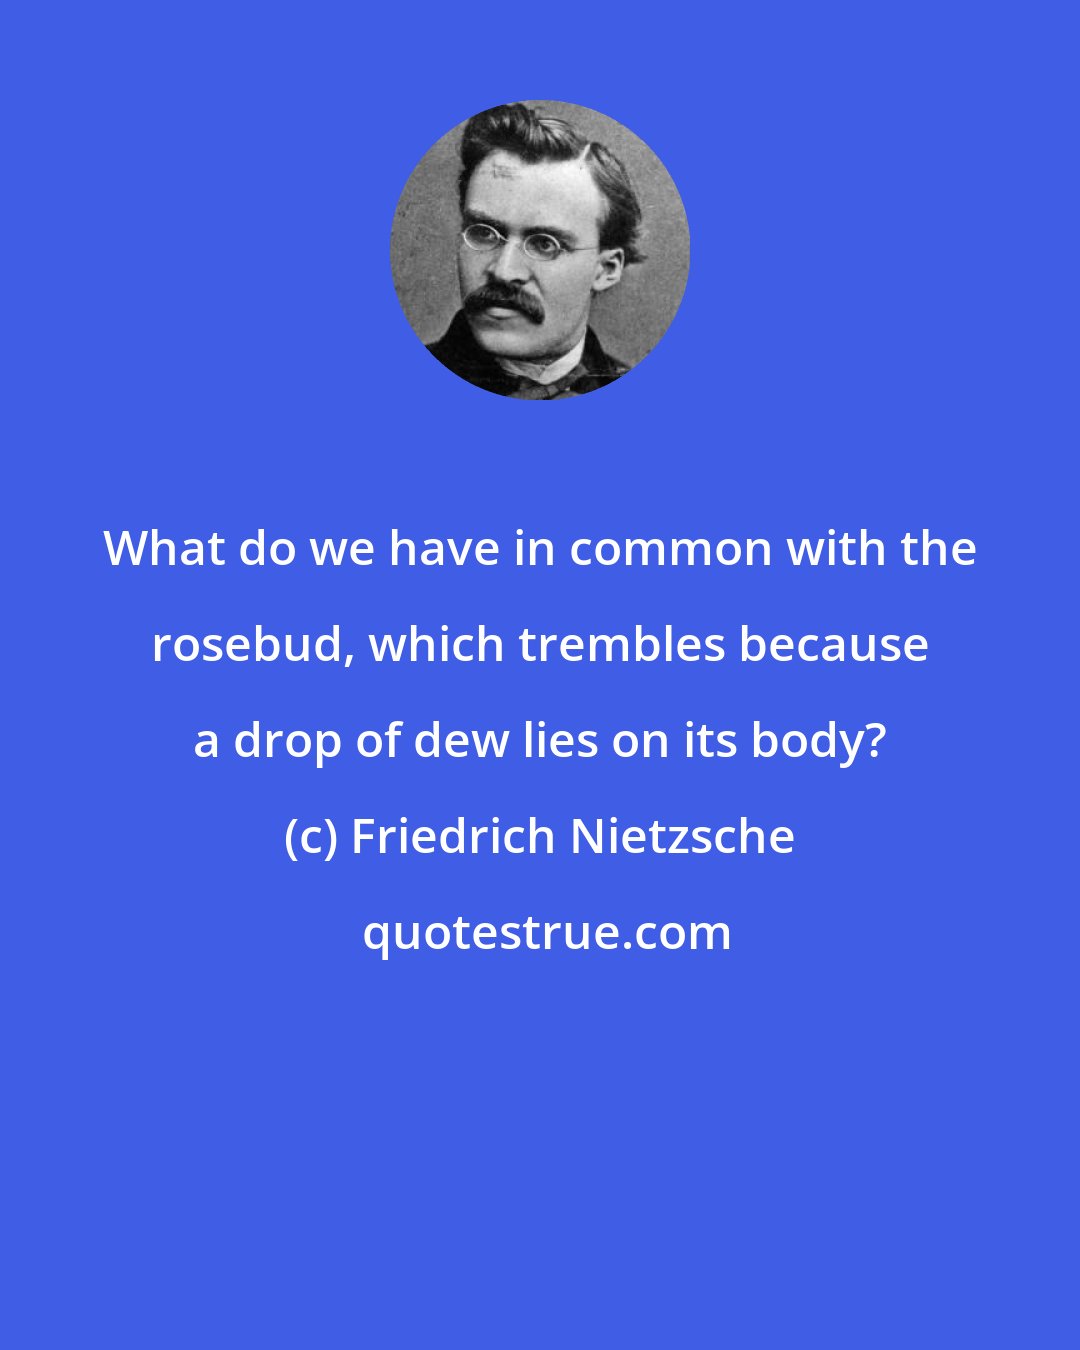 Friedrich Nietzsche: What do we have in common with the rosebud, which trembles because a drop of dew lies on its body?